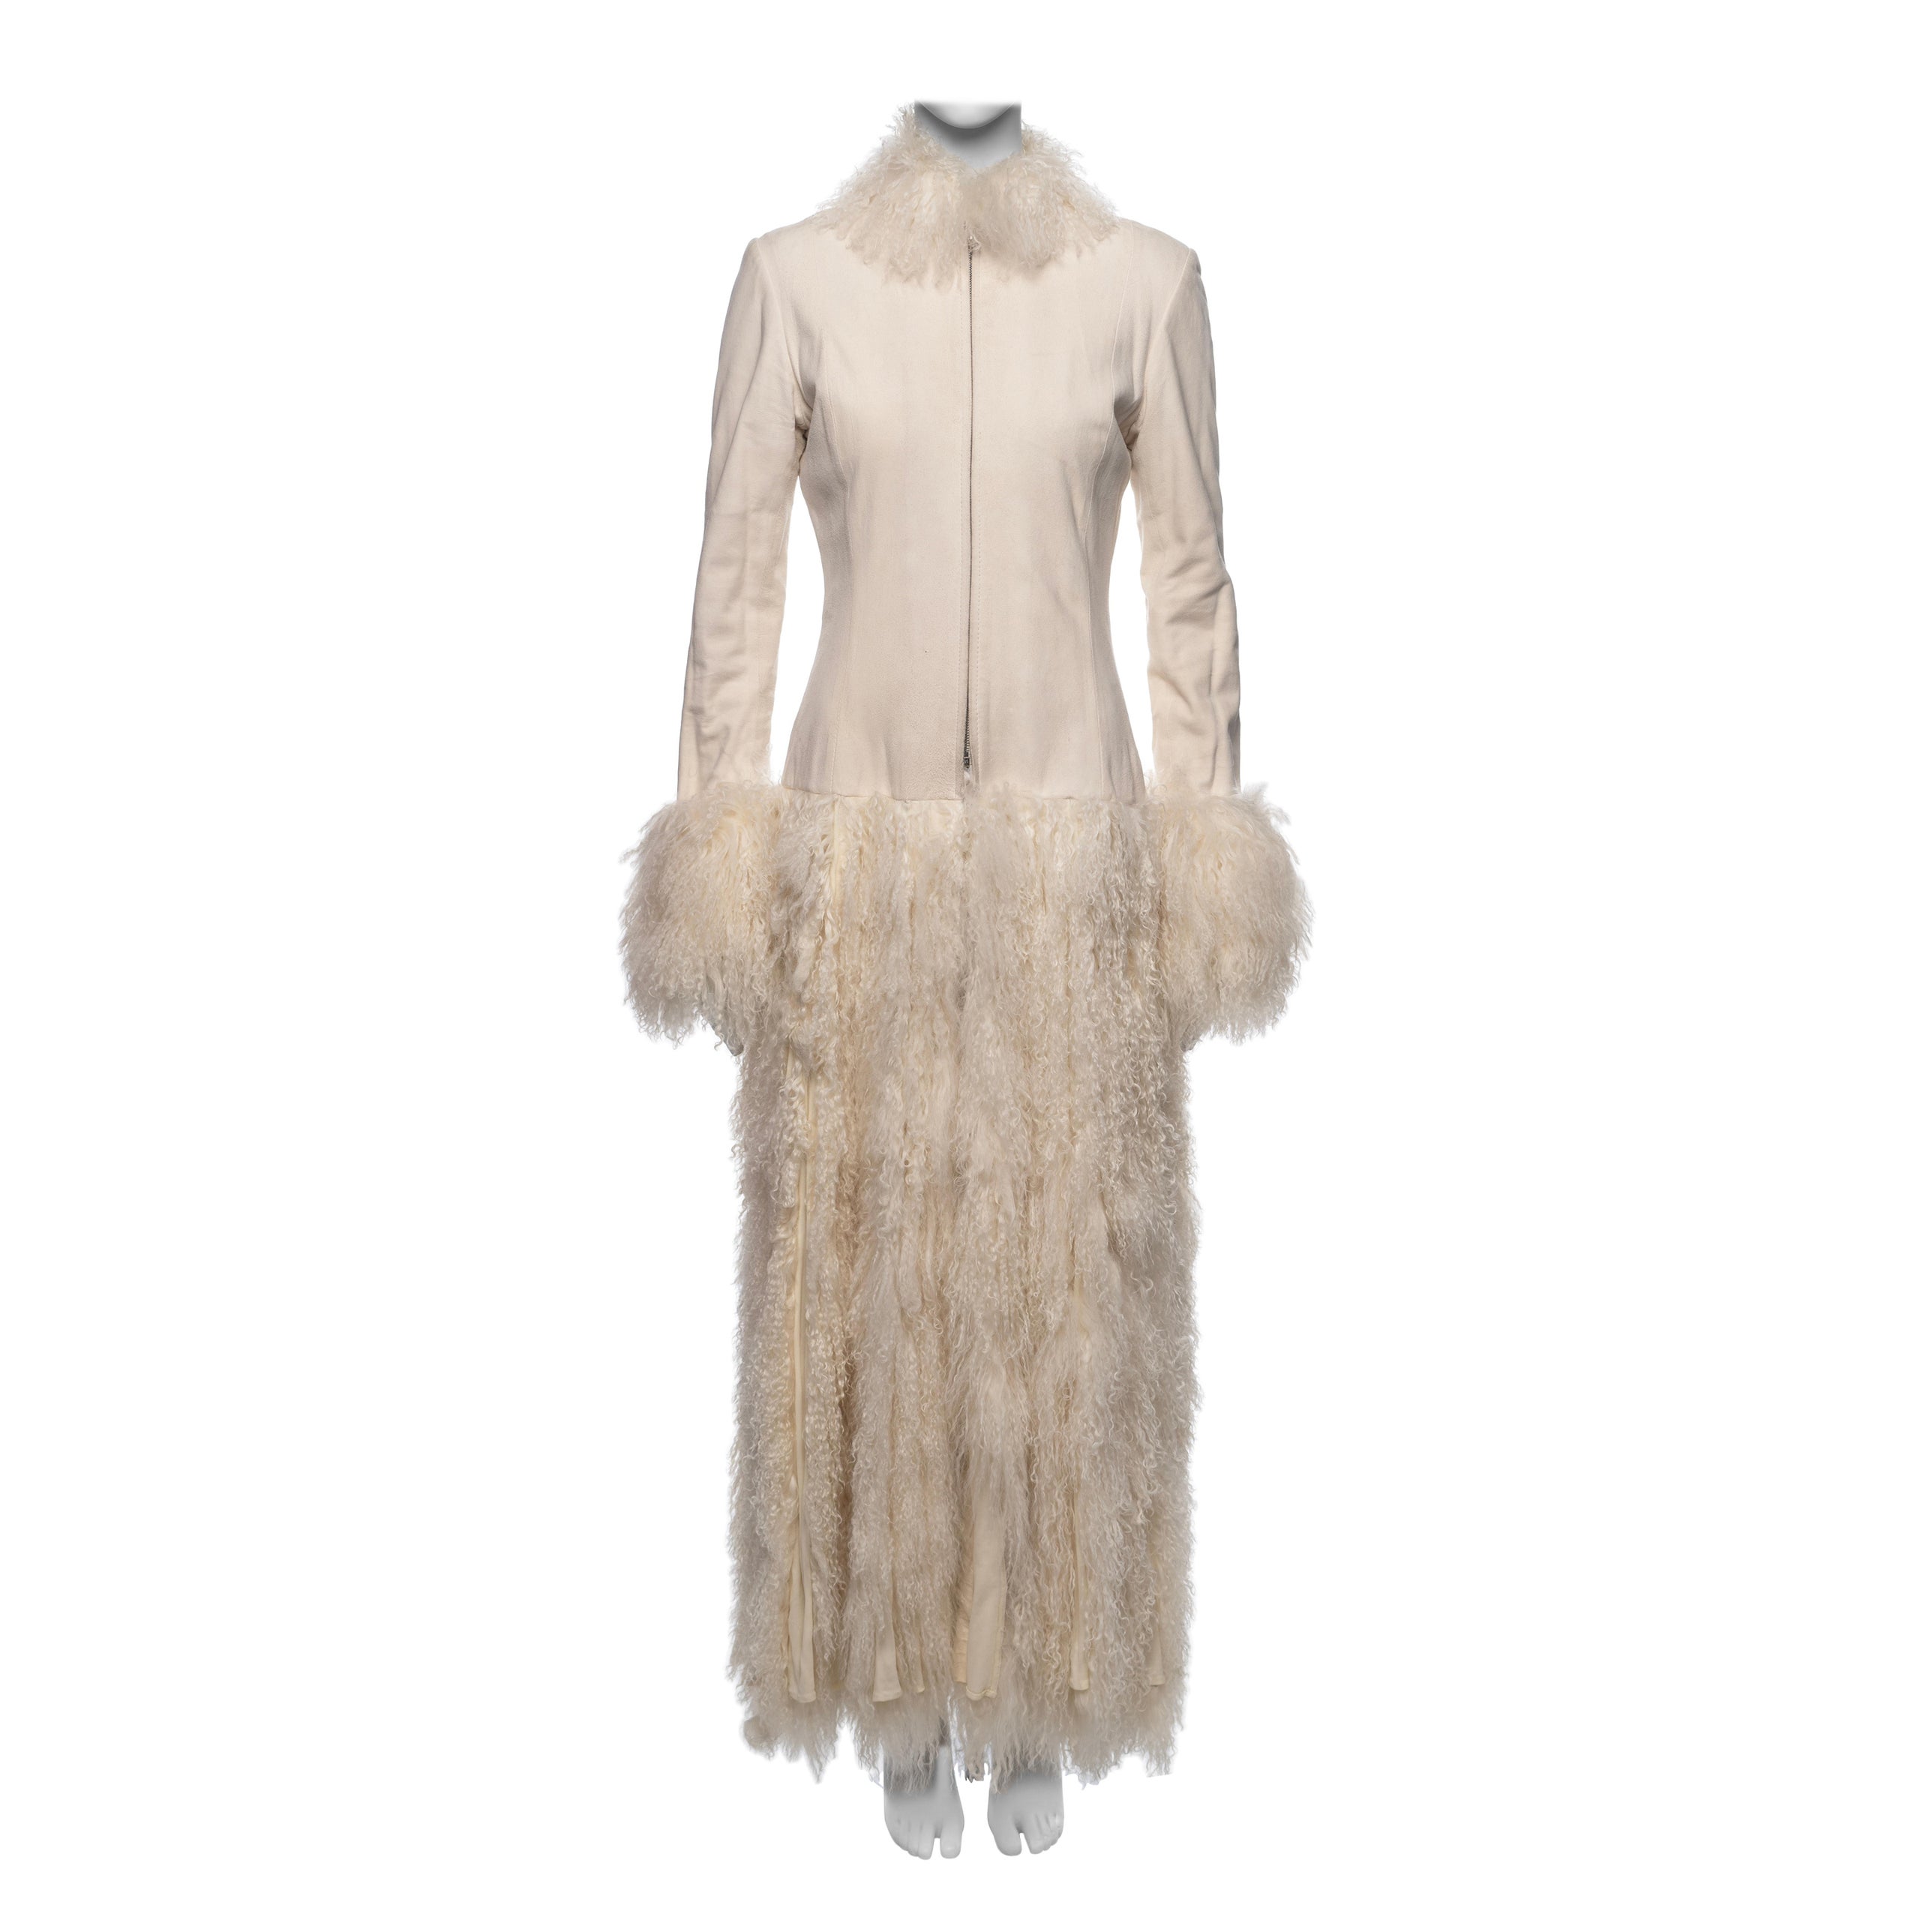 Jean Paul Gaultier White Mongolian Lamb Fur and Leather Coat Dress, FW 2006 For Sale